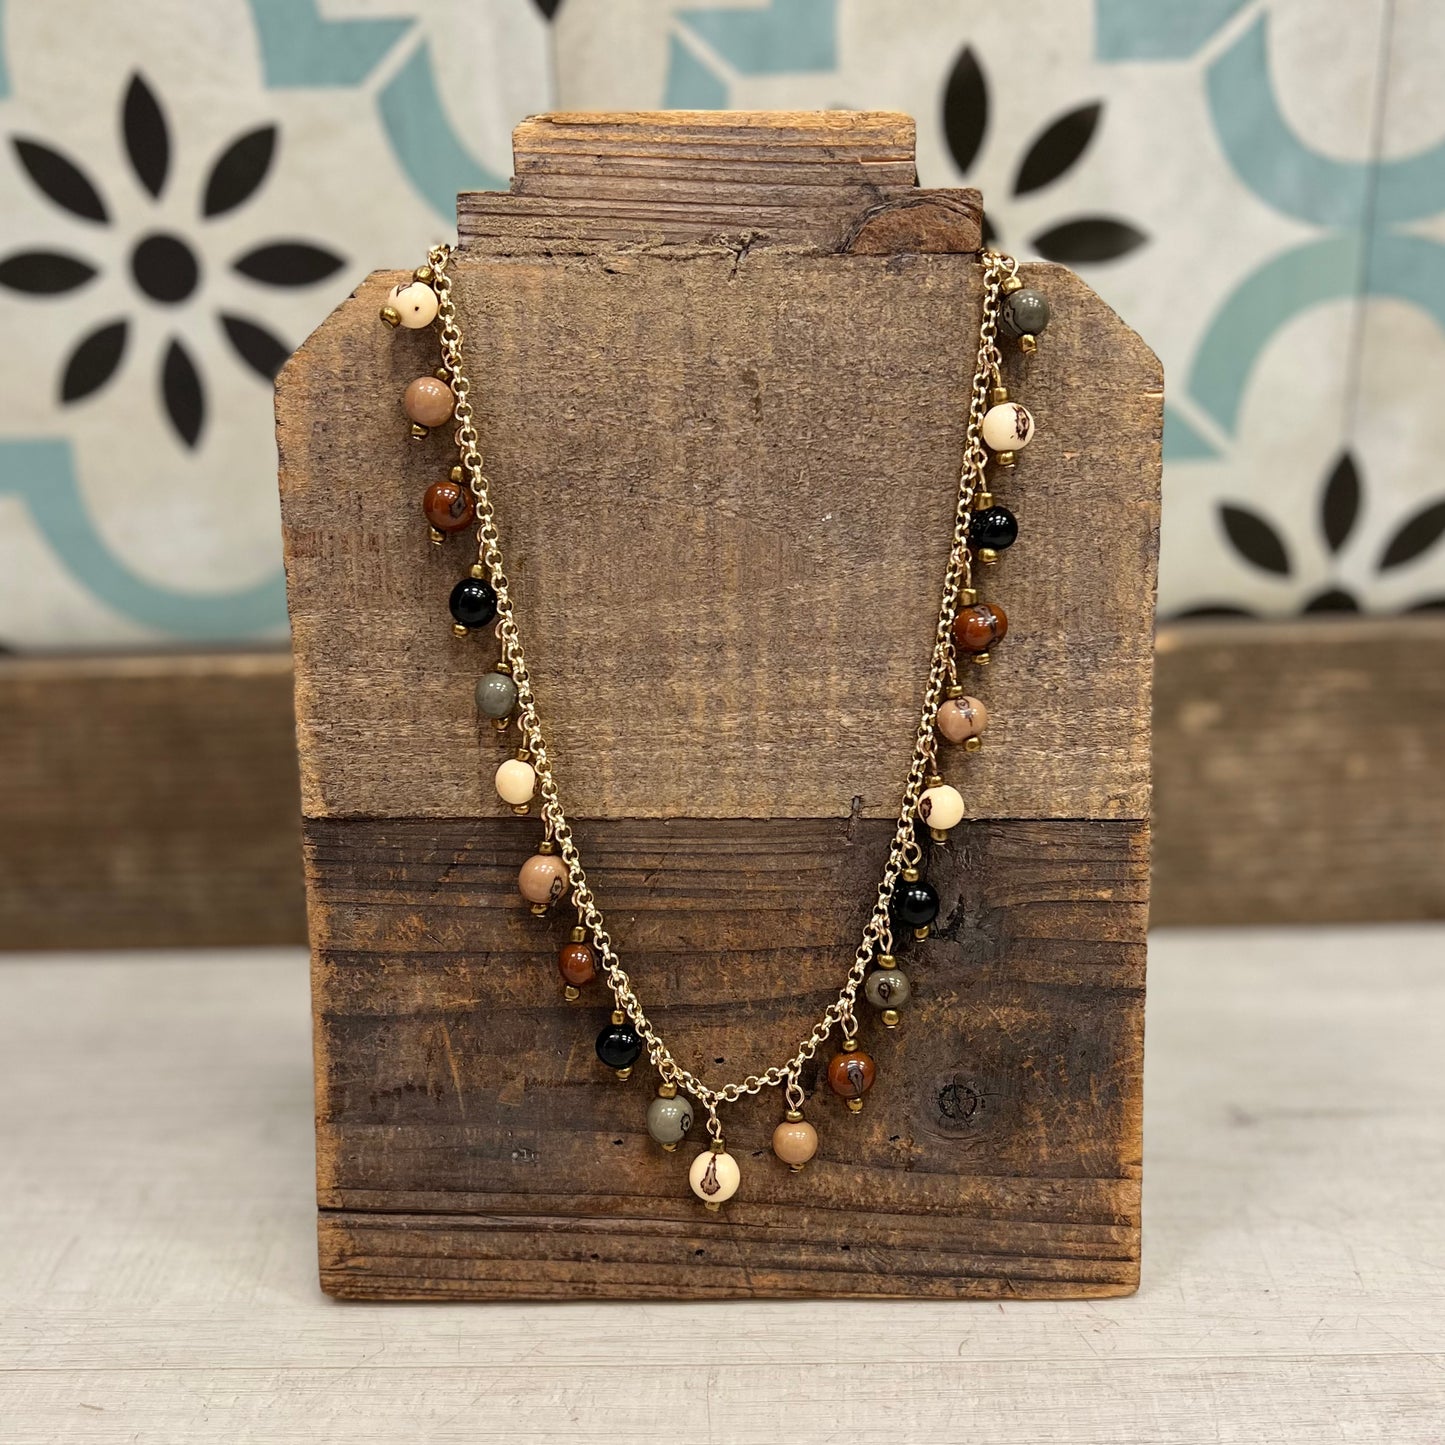 Tagua Bead Chain Necklace - Neutral